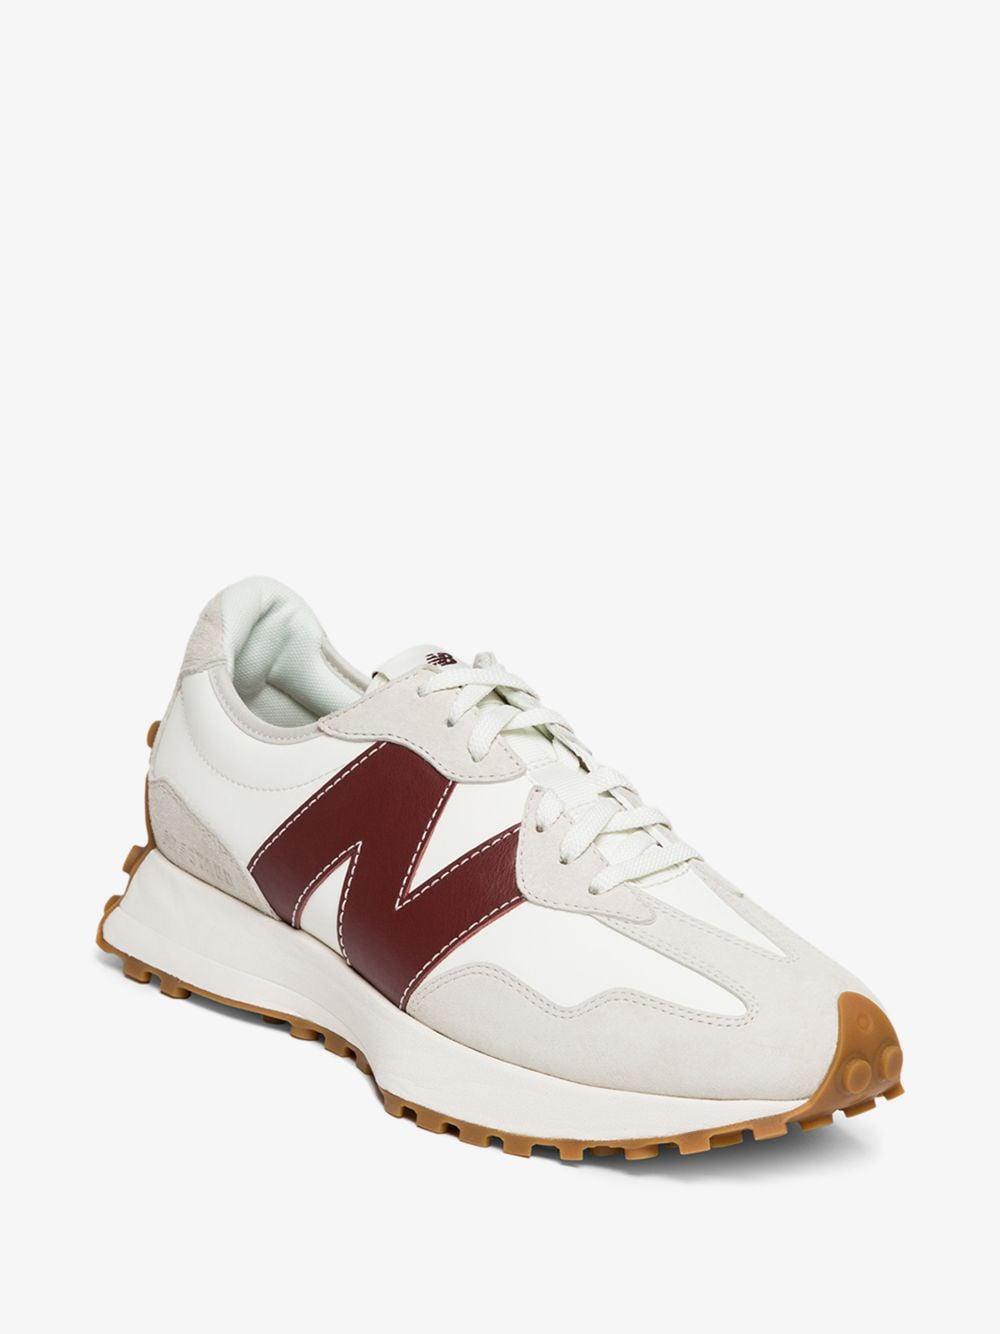 New Balance X Staud 327 Sneakers in White | Lyst